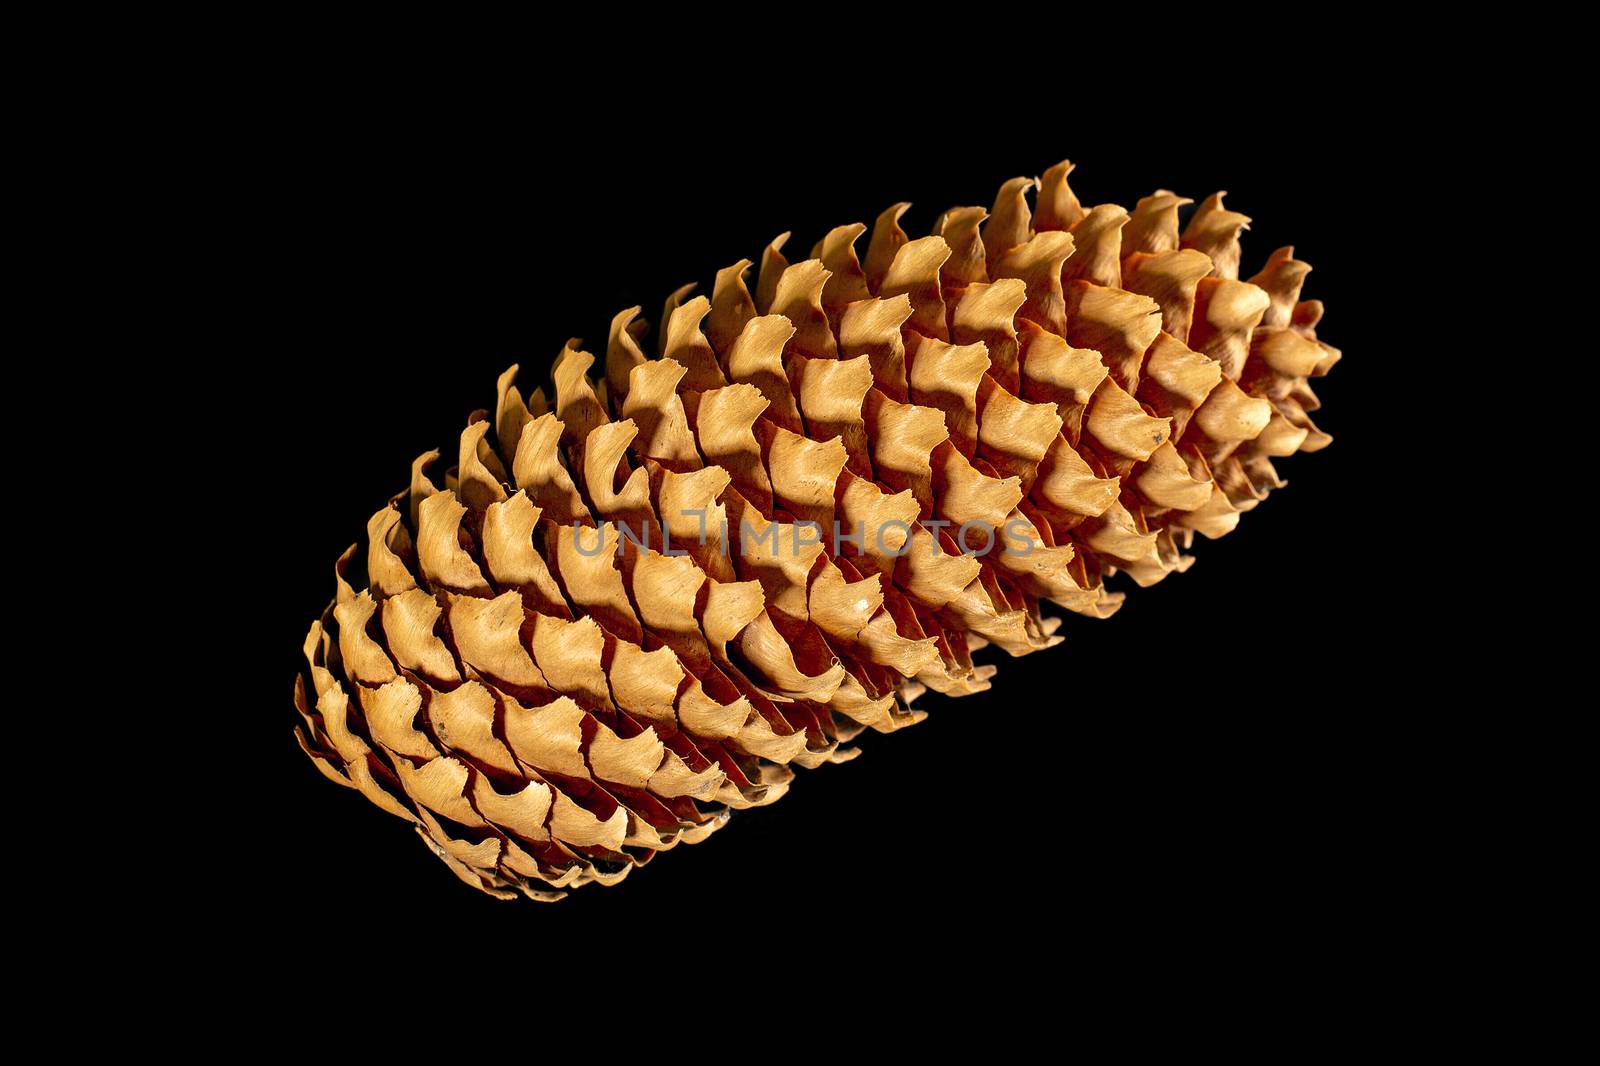 brown pine cone isolated on black background by 977_ReX_977